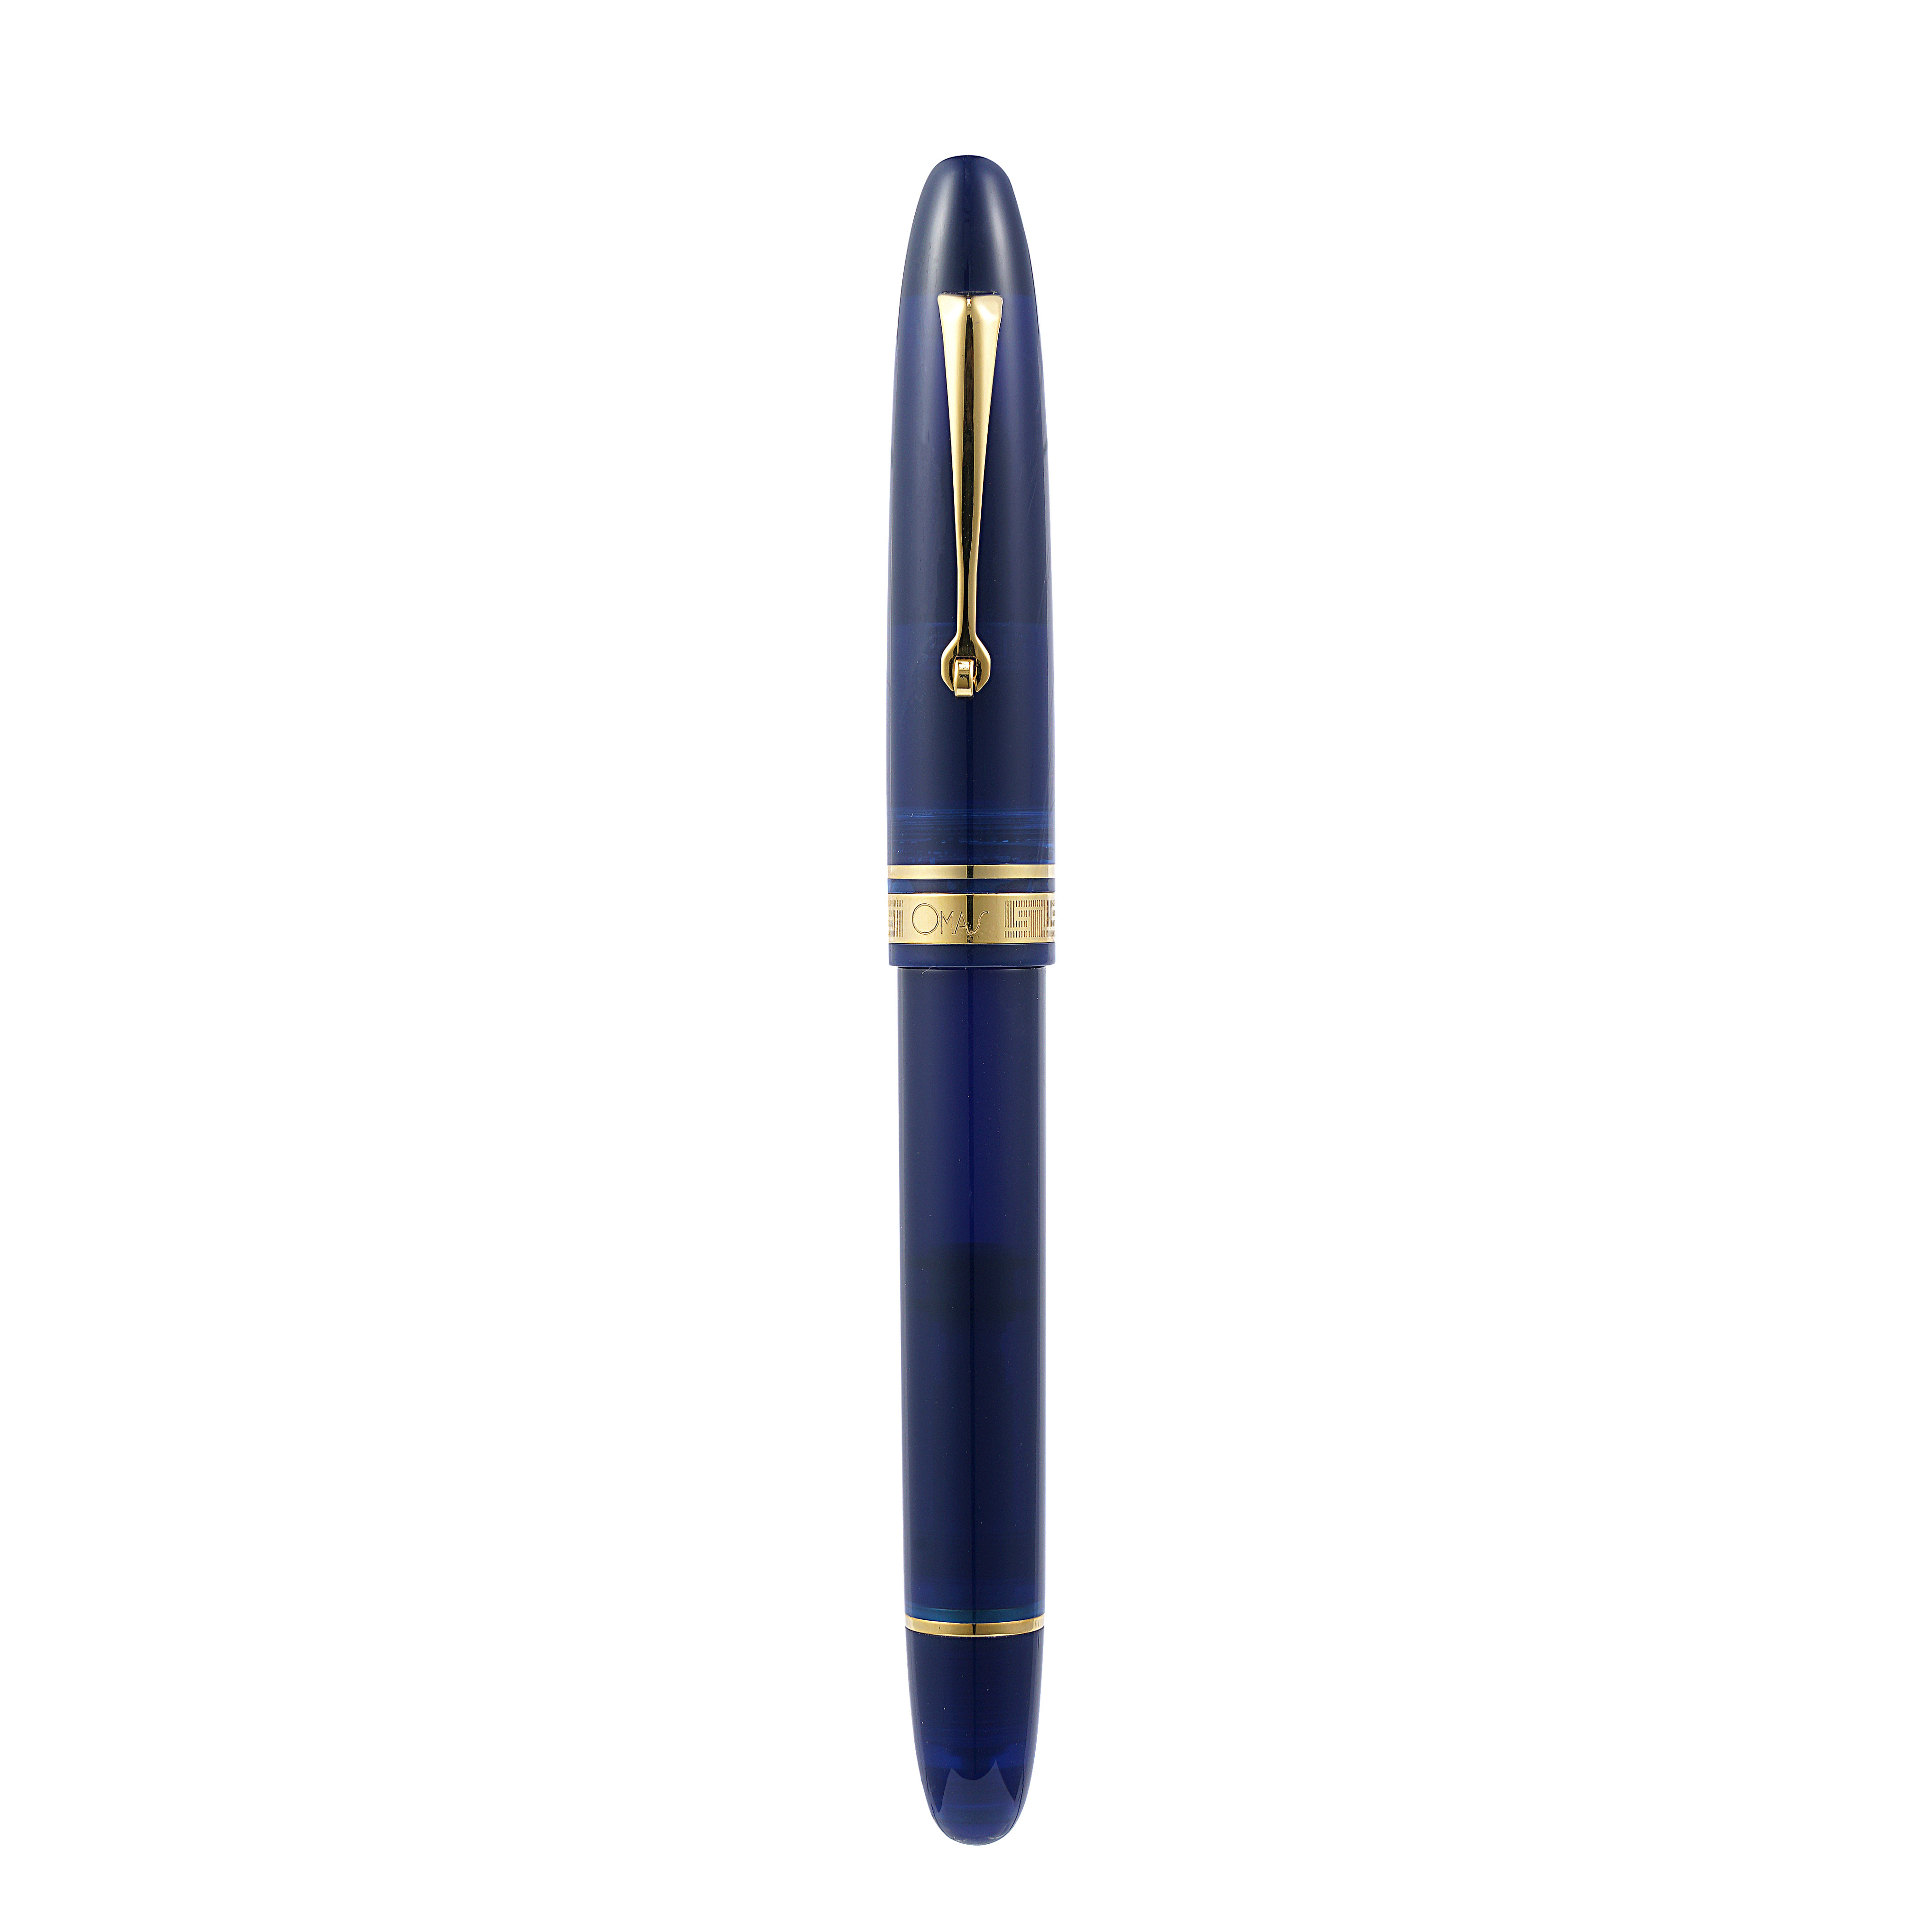 Omas Ogiva Fountain Pen in Blu with Gold Trim